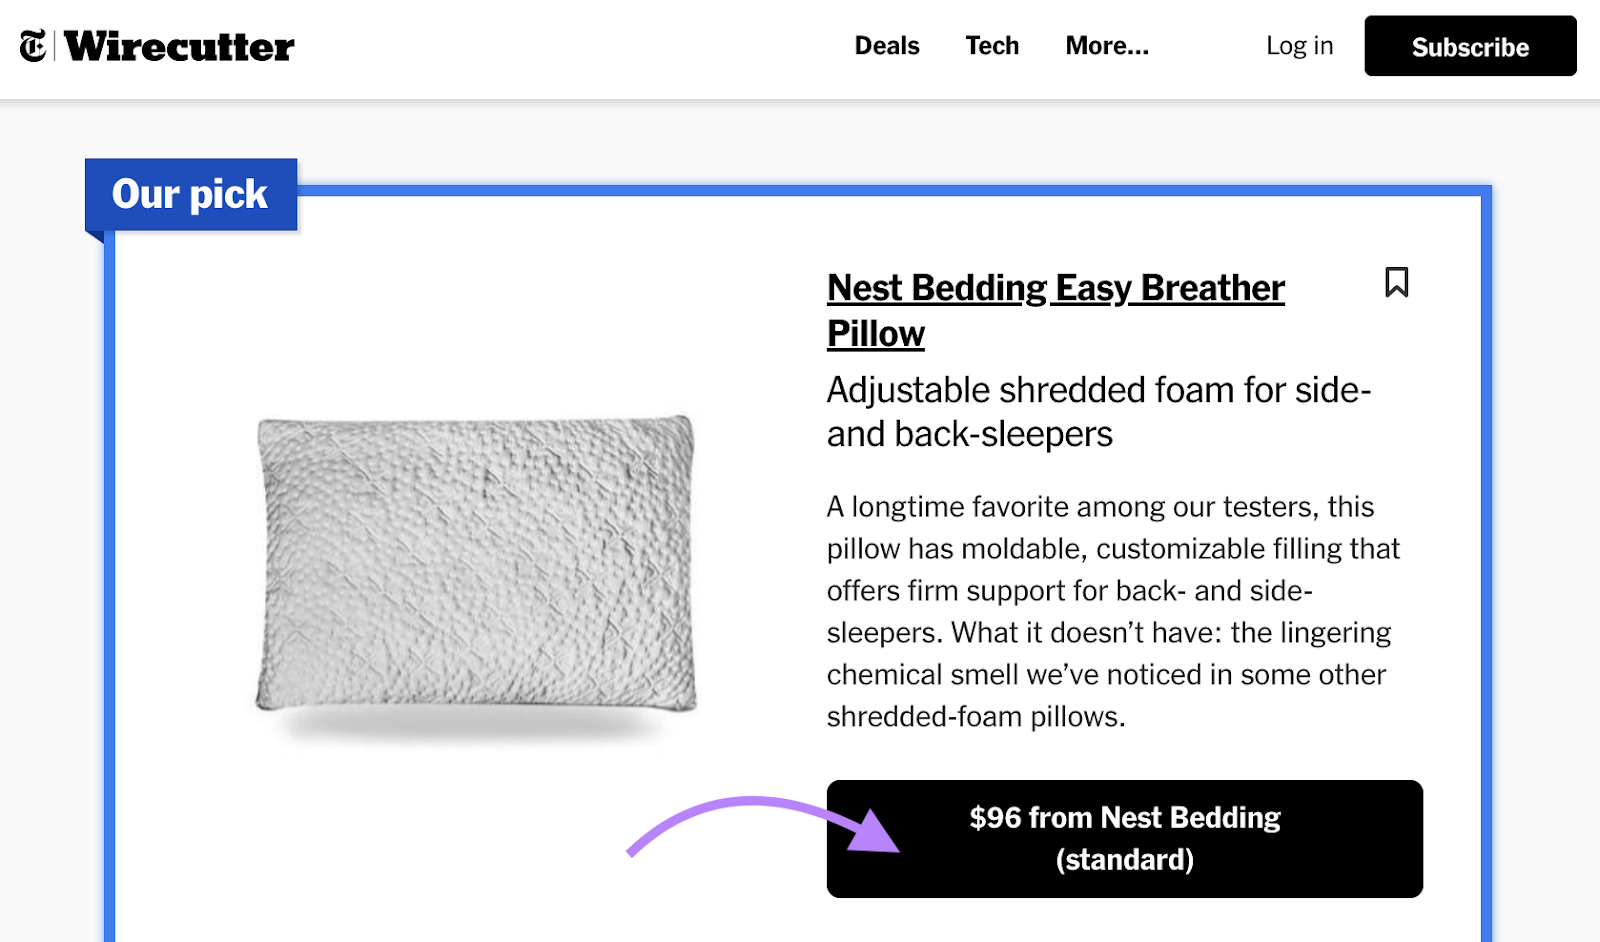 an affiliate link to Nest Bedding in the New York Times (NYT) article